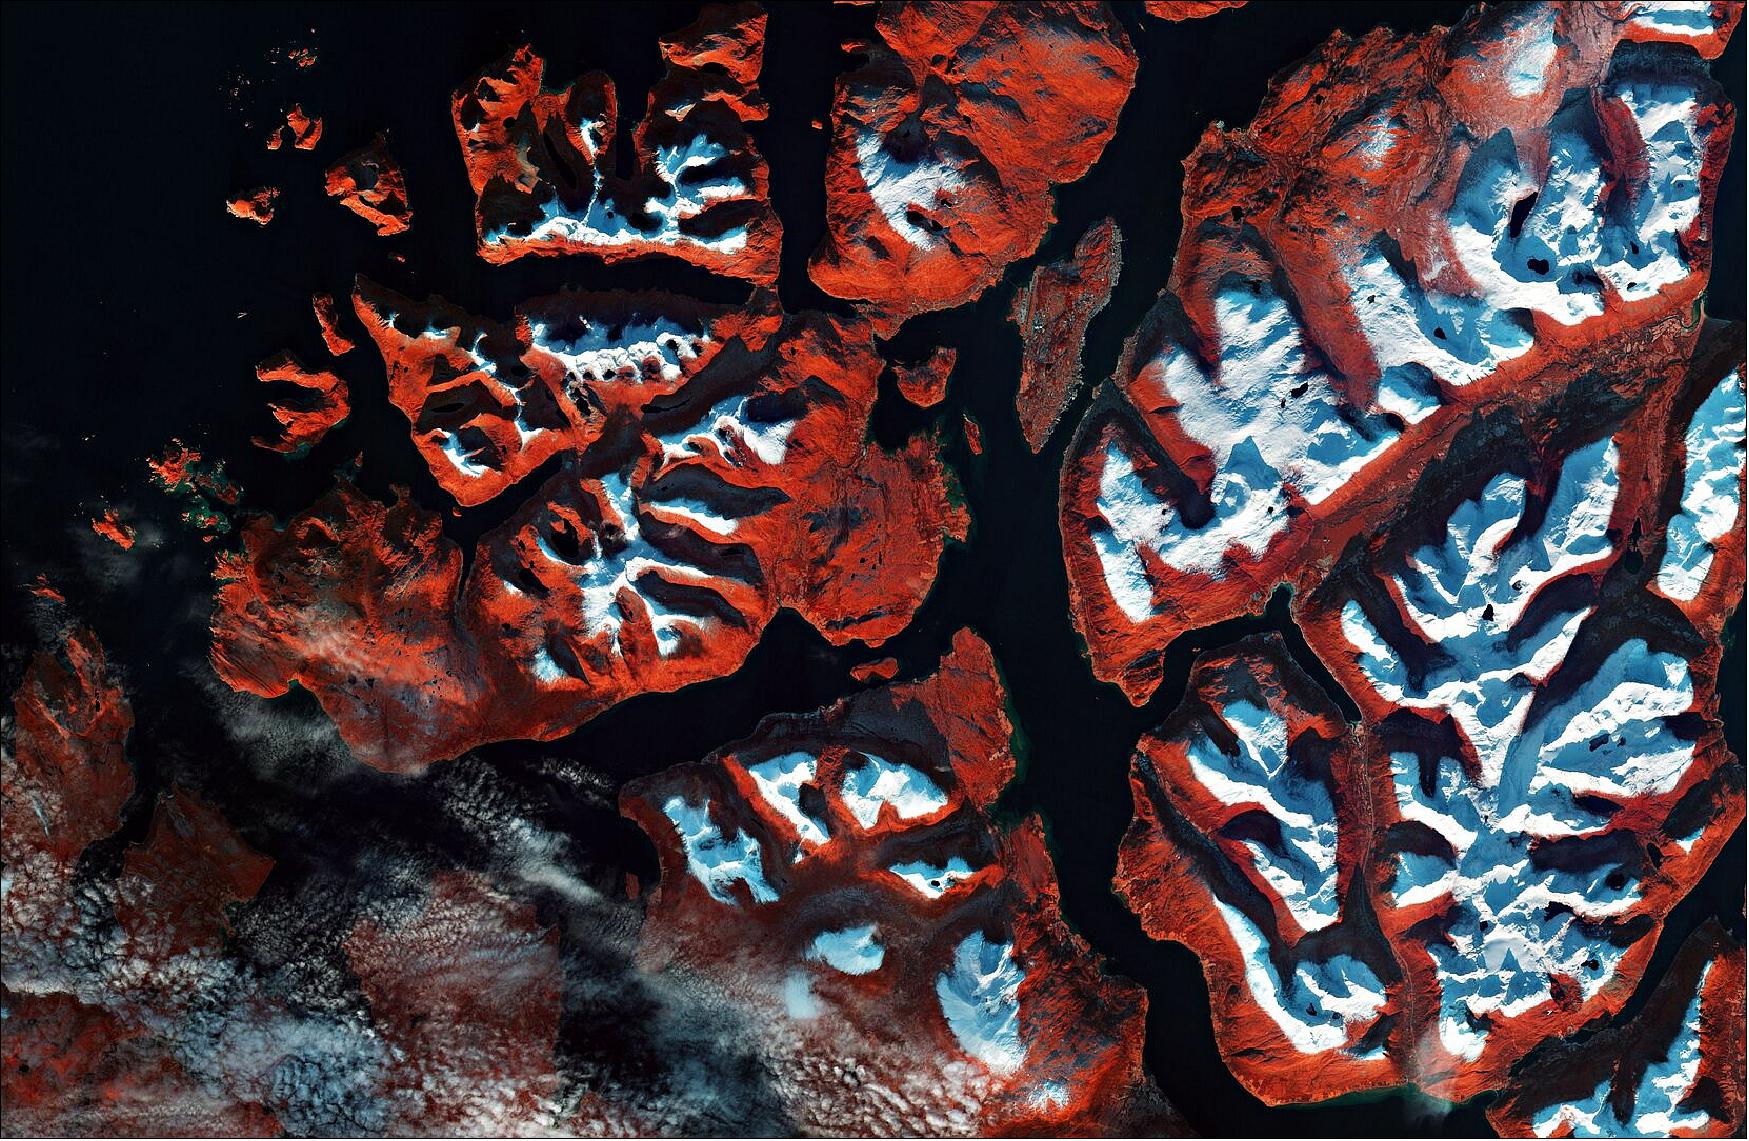 Figure 1: This false-color image was processed in a way that included the near-infrared channel, which makes vegetation appear bright red. The snow over the surrounding mountains is visible in white, adding to the Christmas feel of the image. This image is also featured on the Earth from Space video program (image credit: ESA, the image contains modified Copernicus Sentinel data (2019), processed by ESA, CC BY-SA 3.0 IGO)